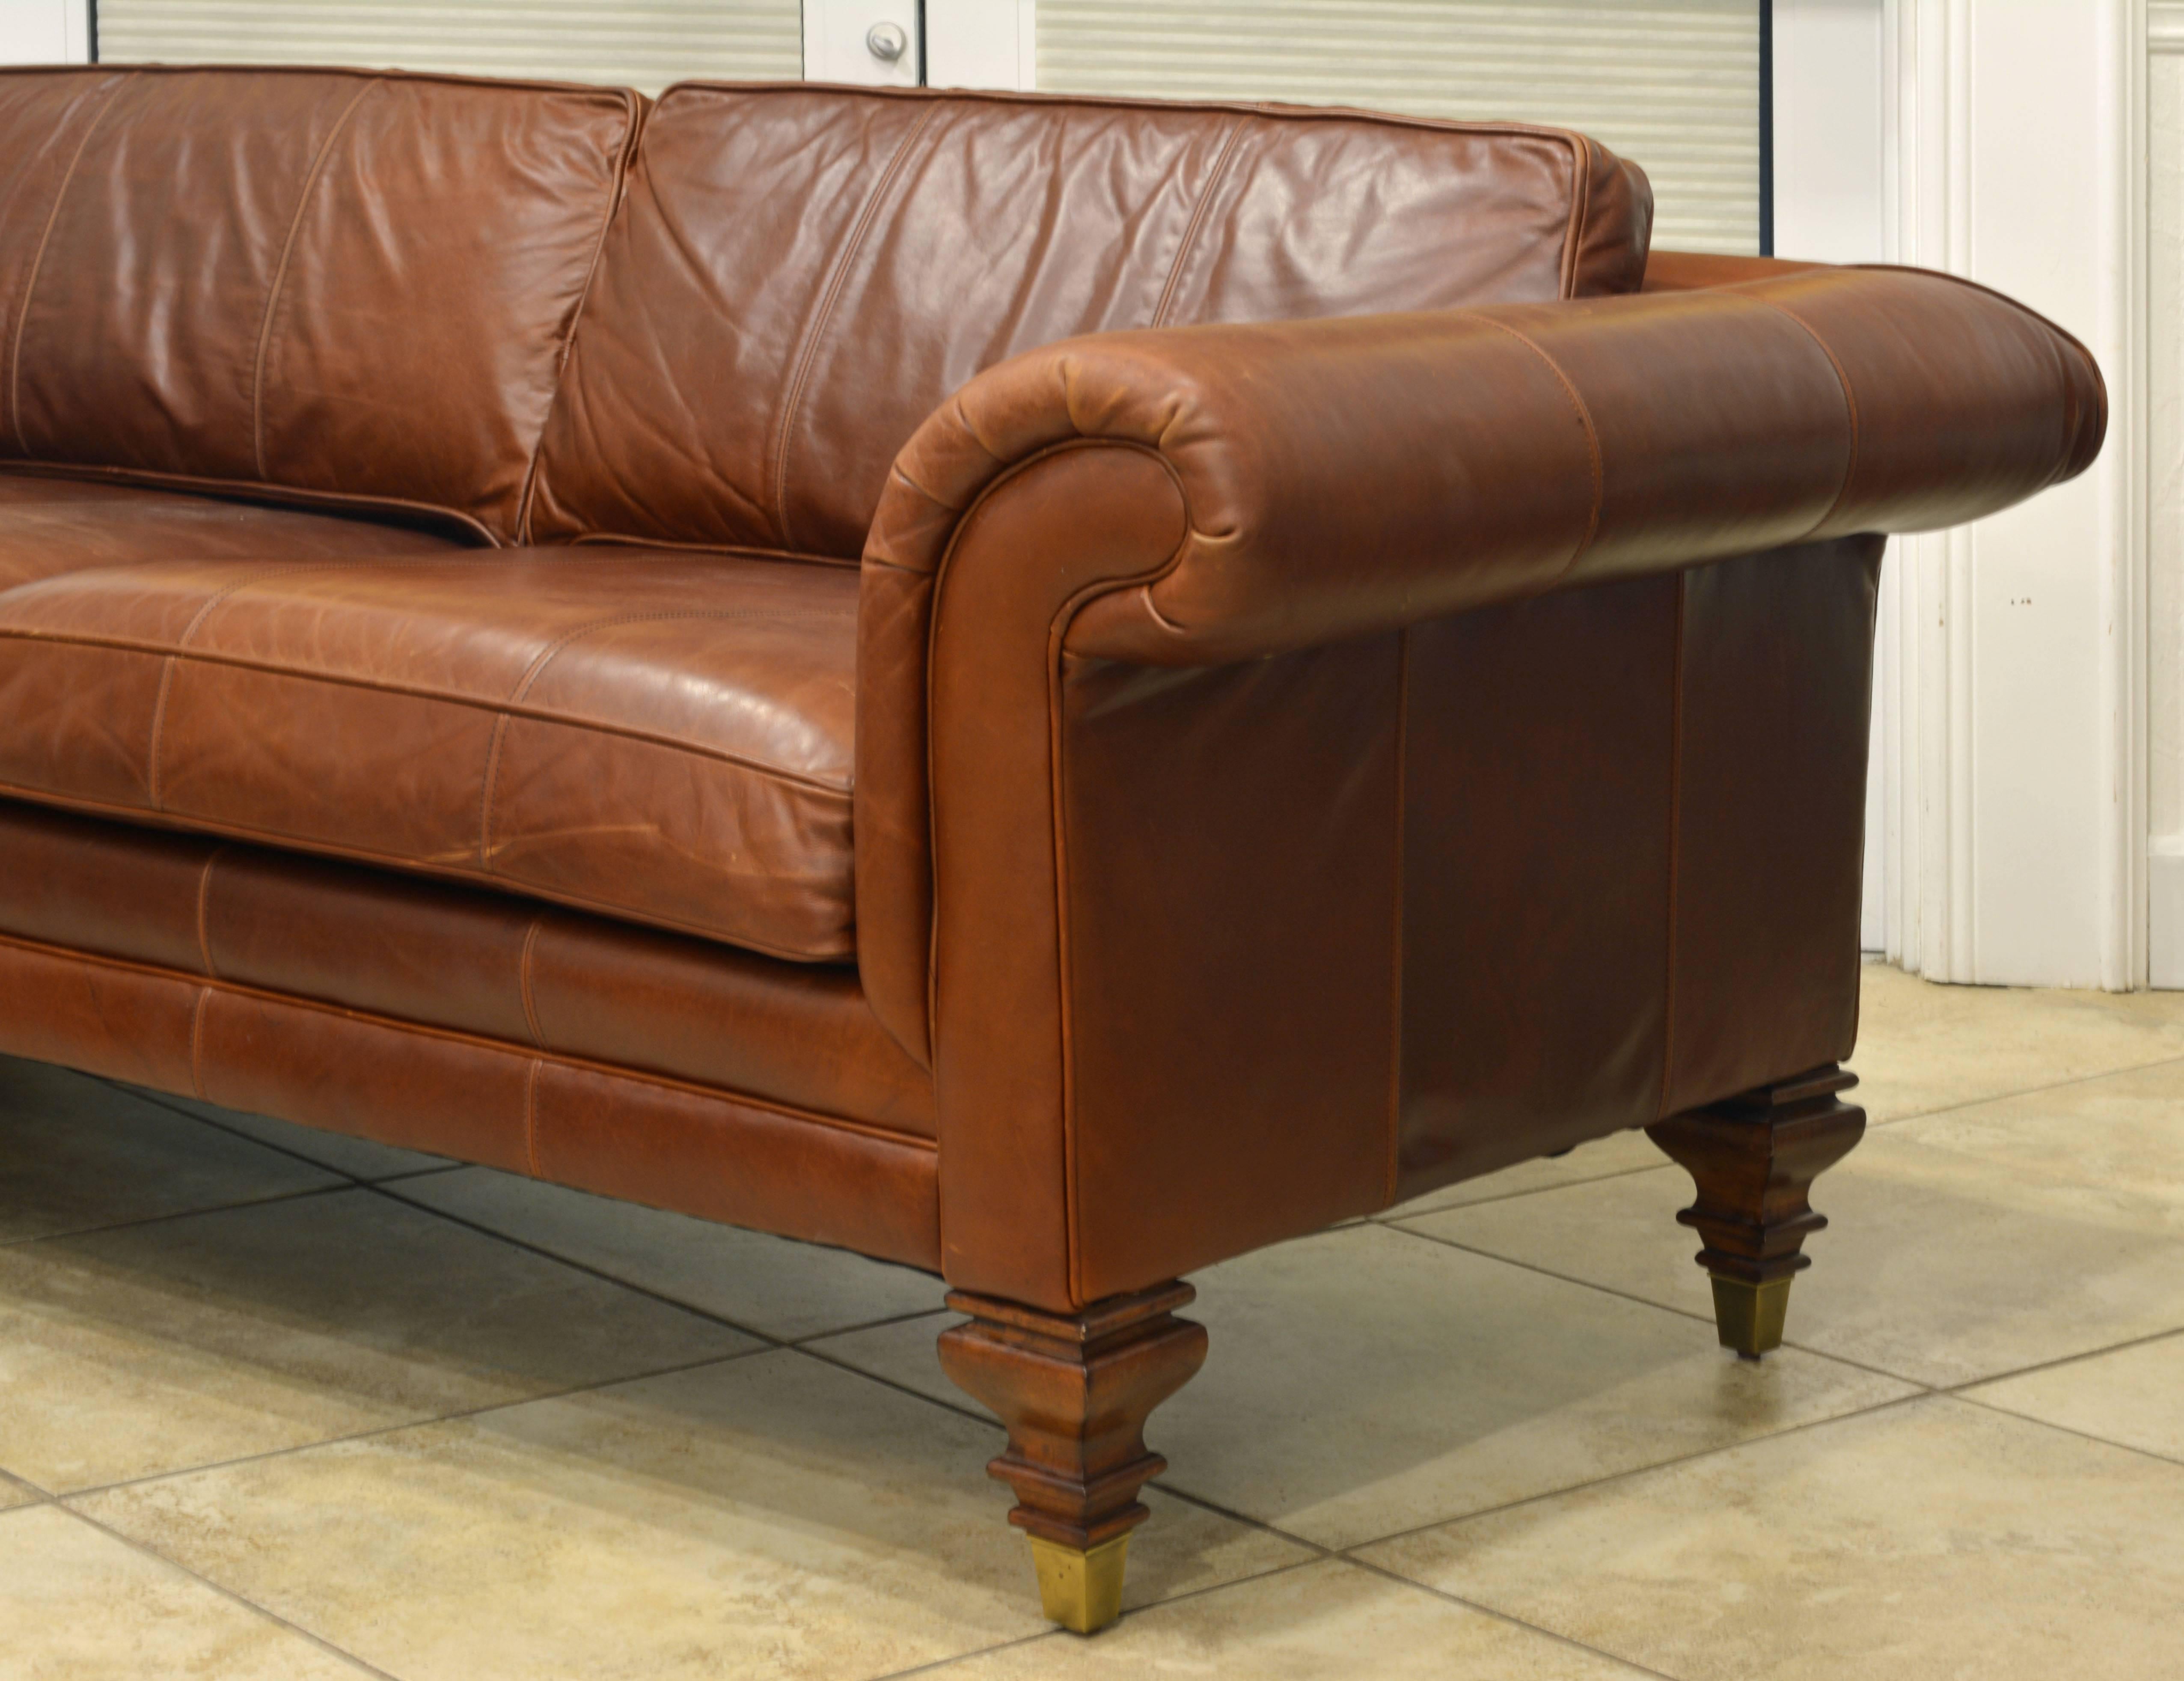 Sink into this beautifully soft vintage leather sofa and put your feet up, because you should be as comfortable as you are stylish. We love the sturdy craftsmanship that went into making this piece, a custom piece by Ralph Lauren Home, no detail was